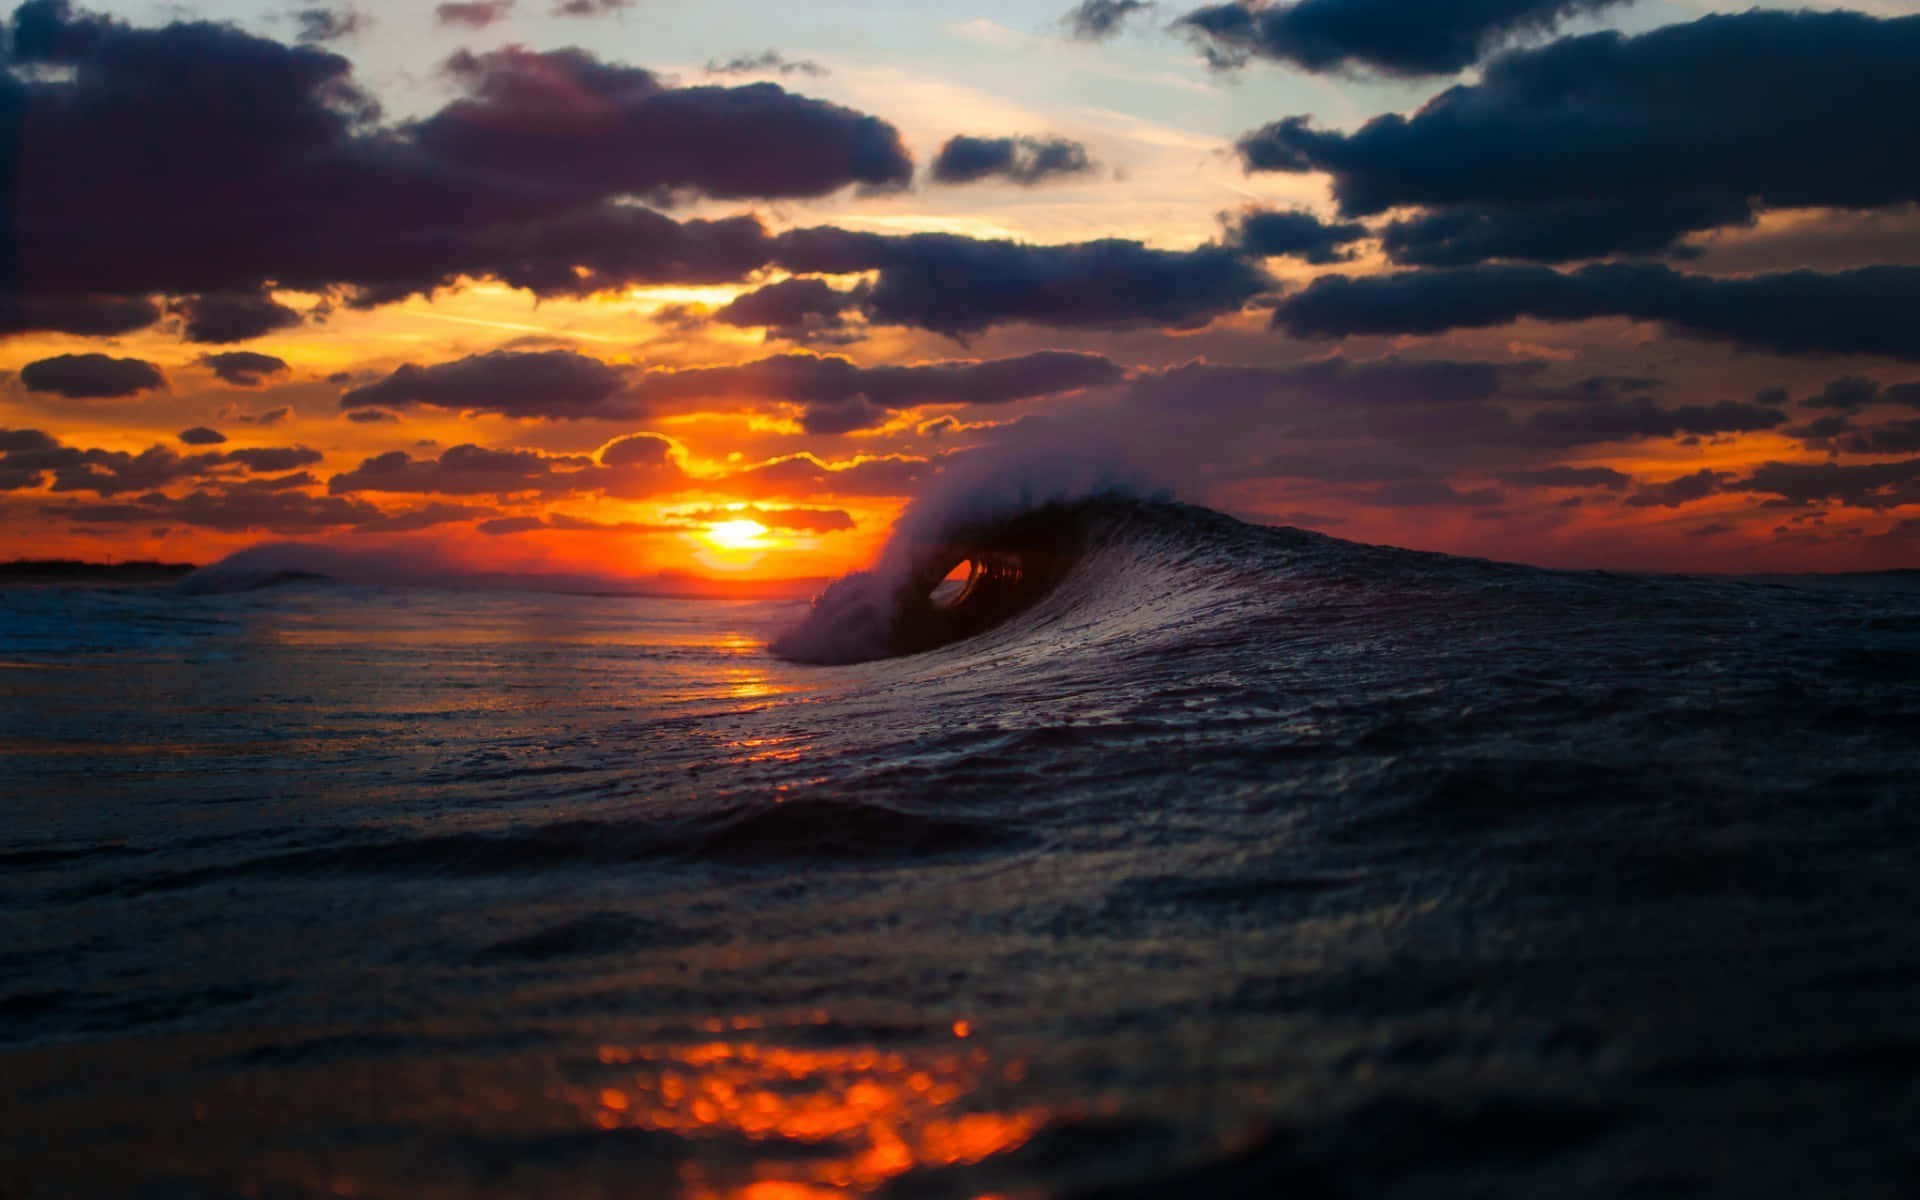 "Catch A Breath-taking Sunset Wave" Wallpaper